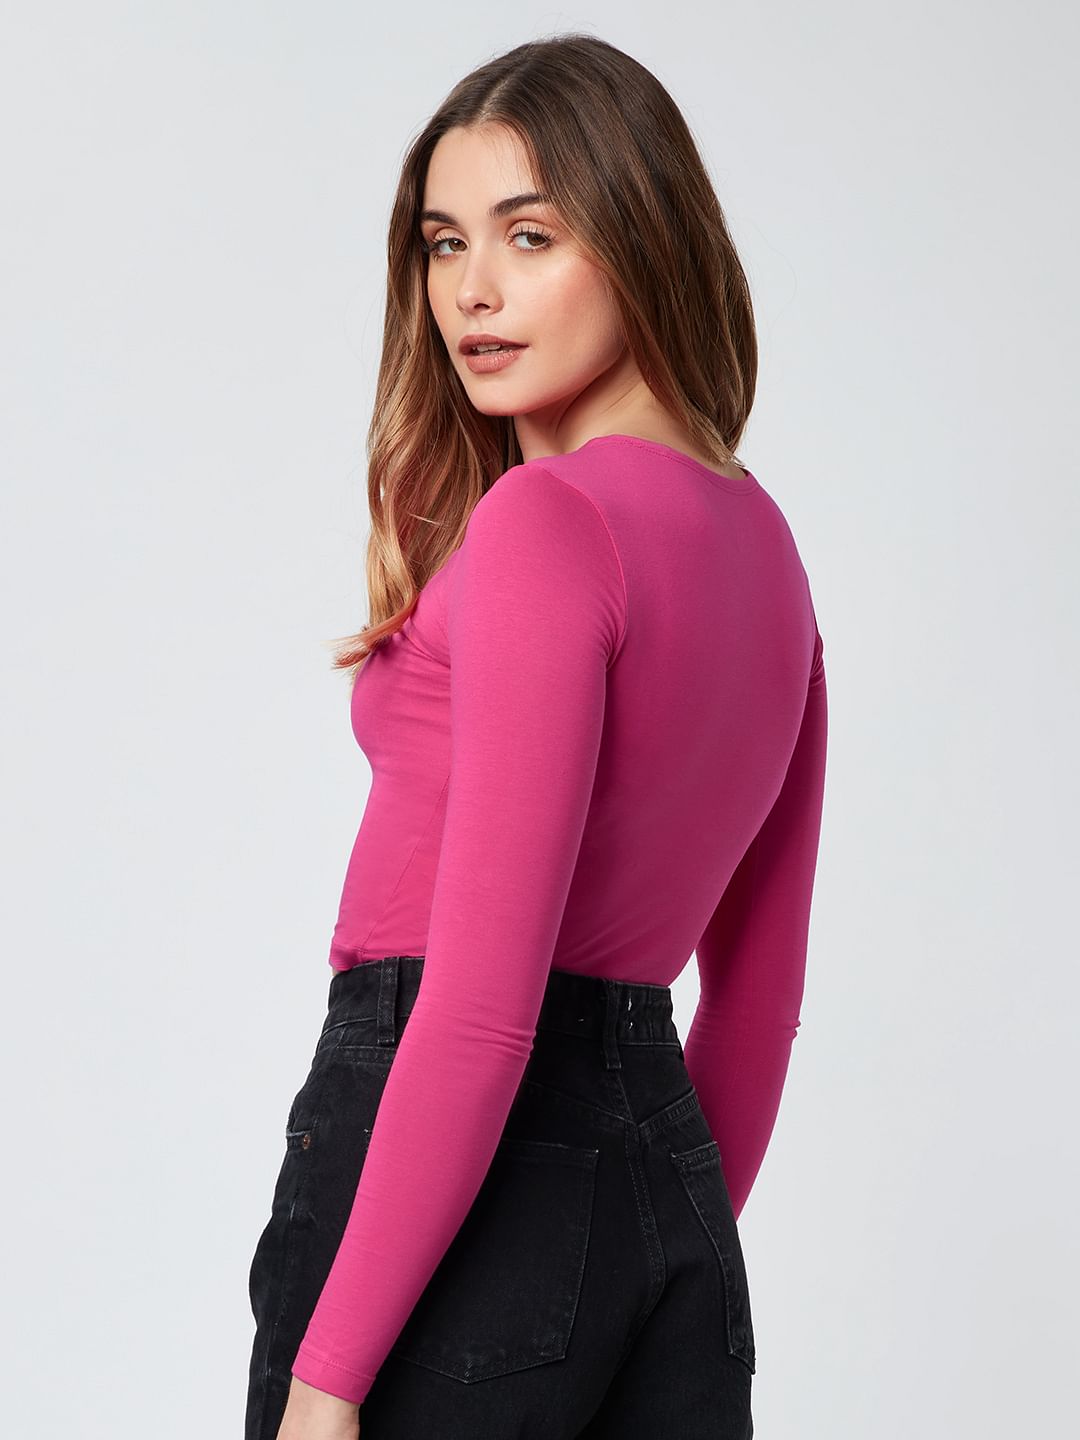 Solids: Hot Pink (Cropped Fit)